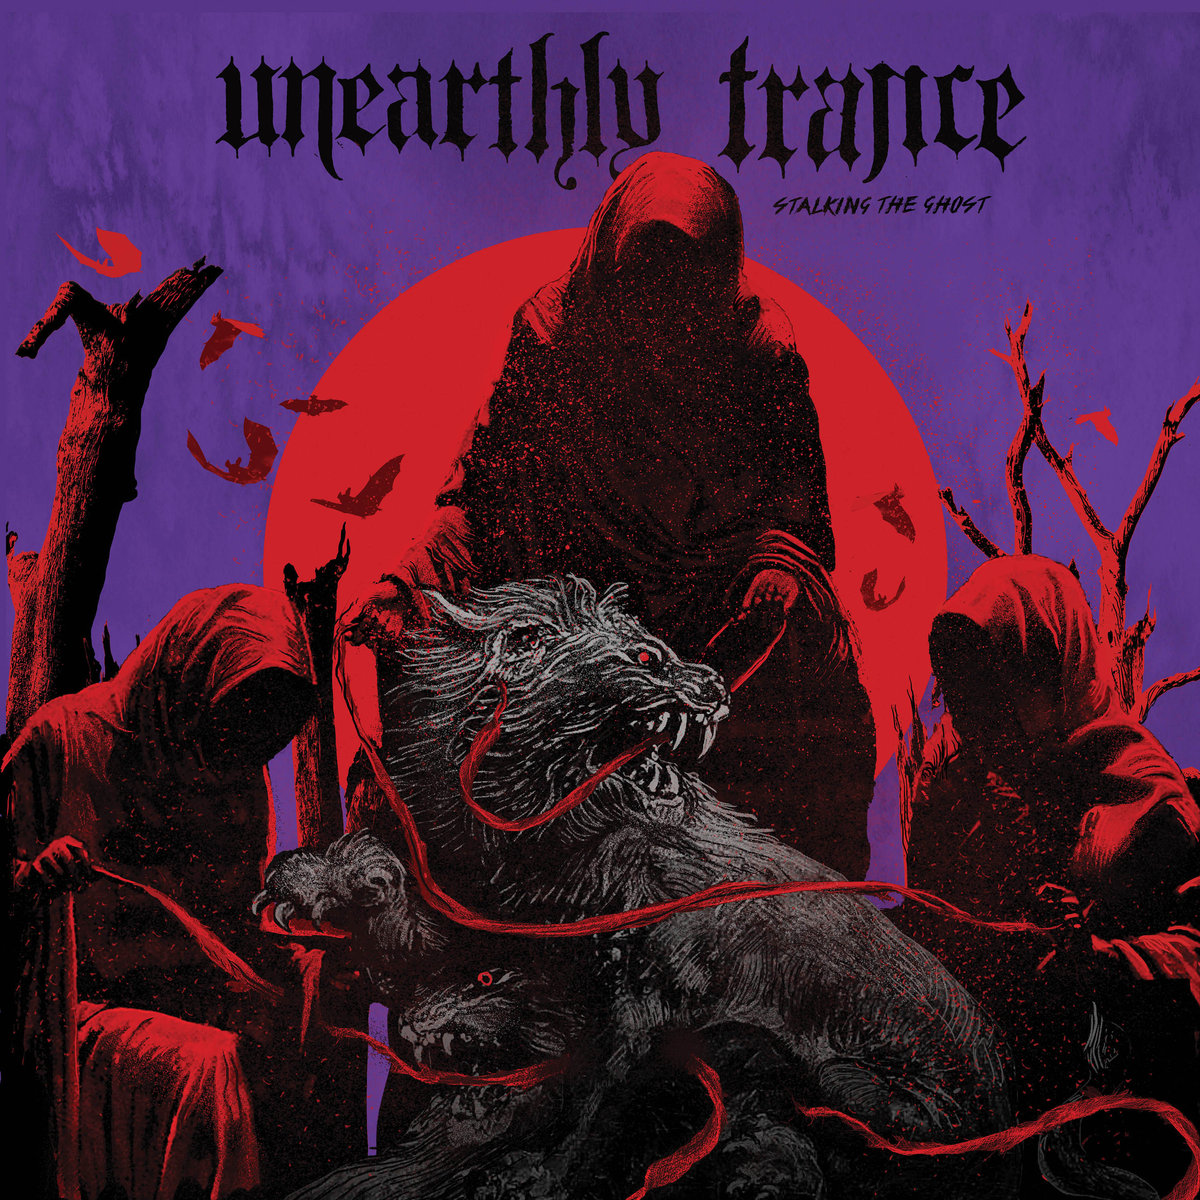 Unearthly Trance HD wallpapers, Desktop wallpaper - most viewed